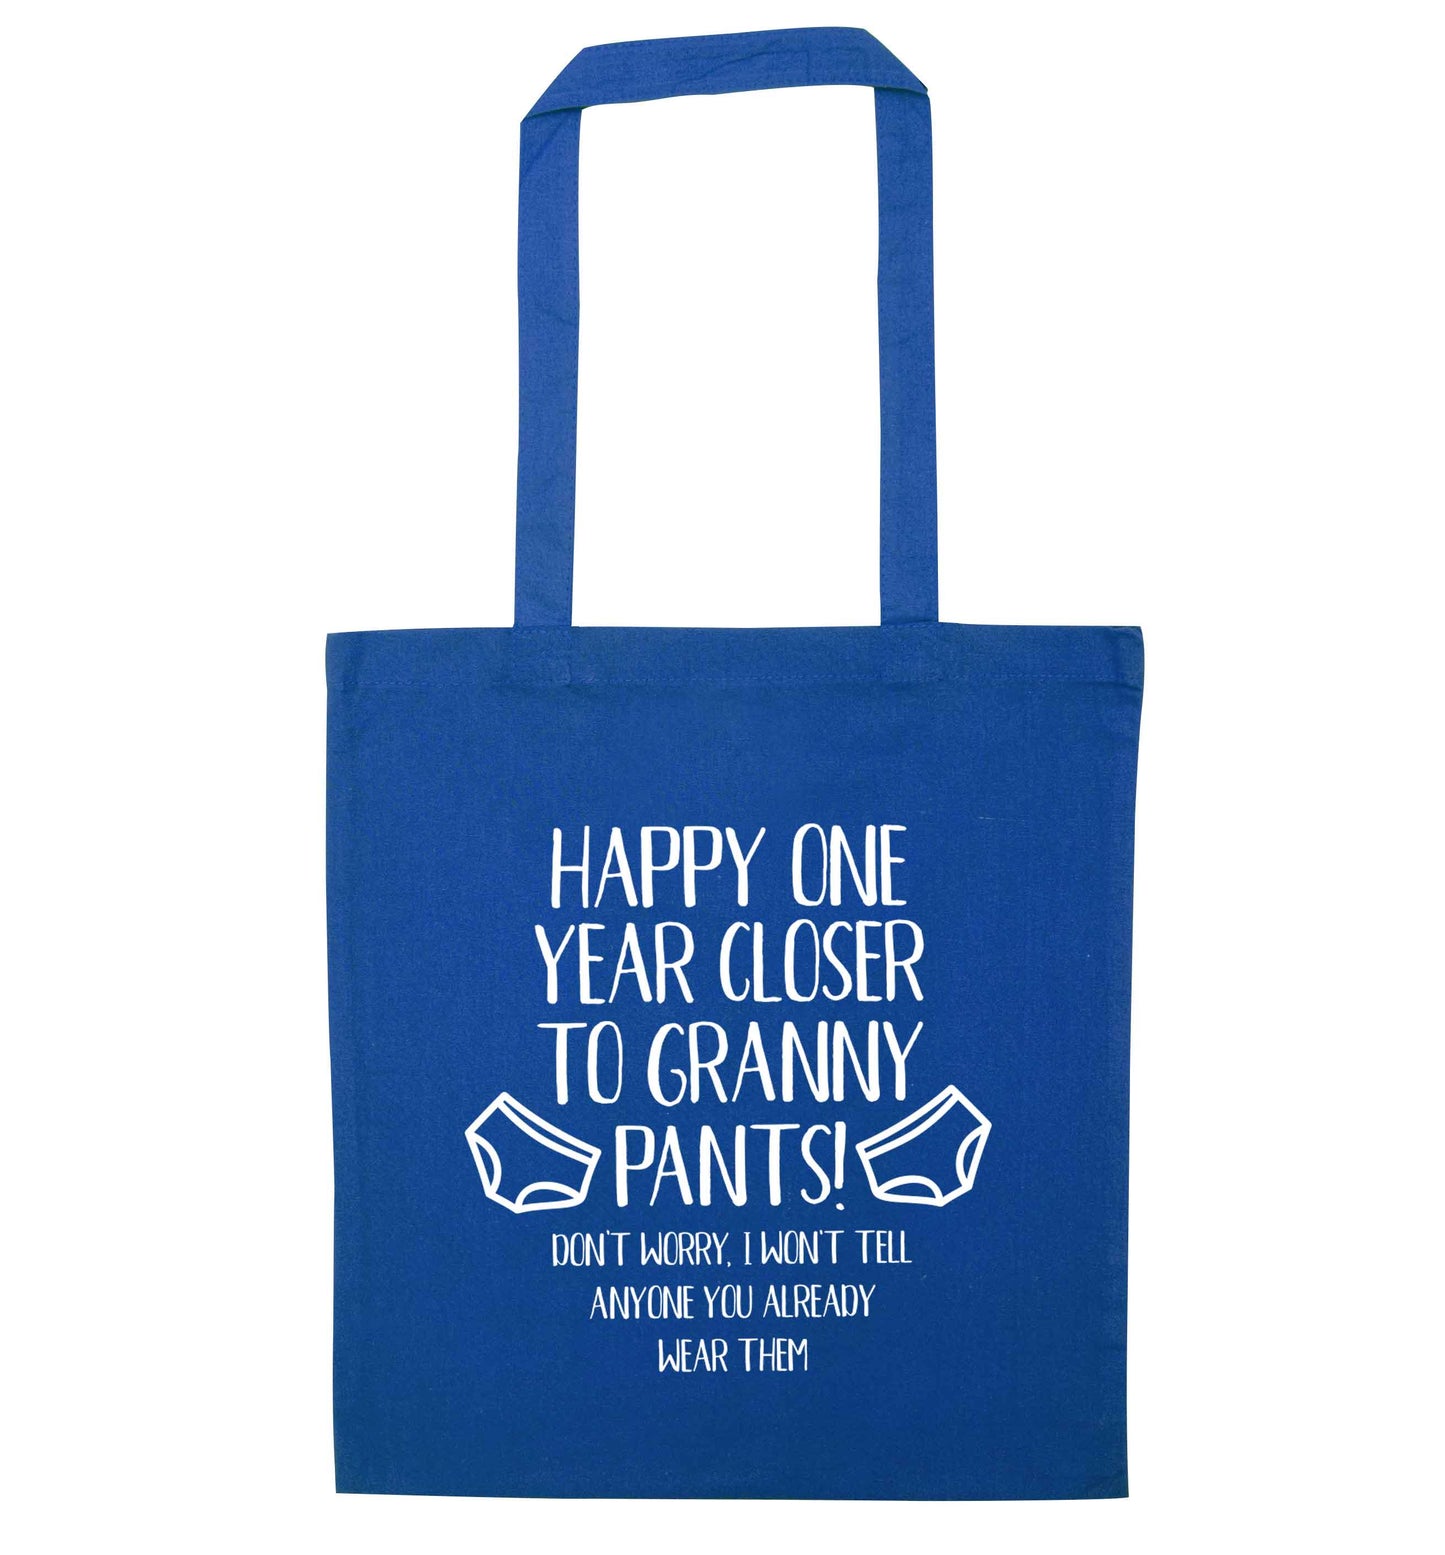 Happy one year closer to granny pants blue tote bag